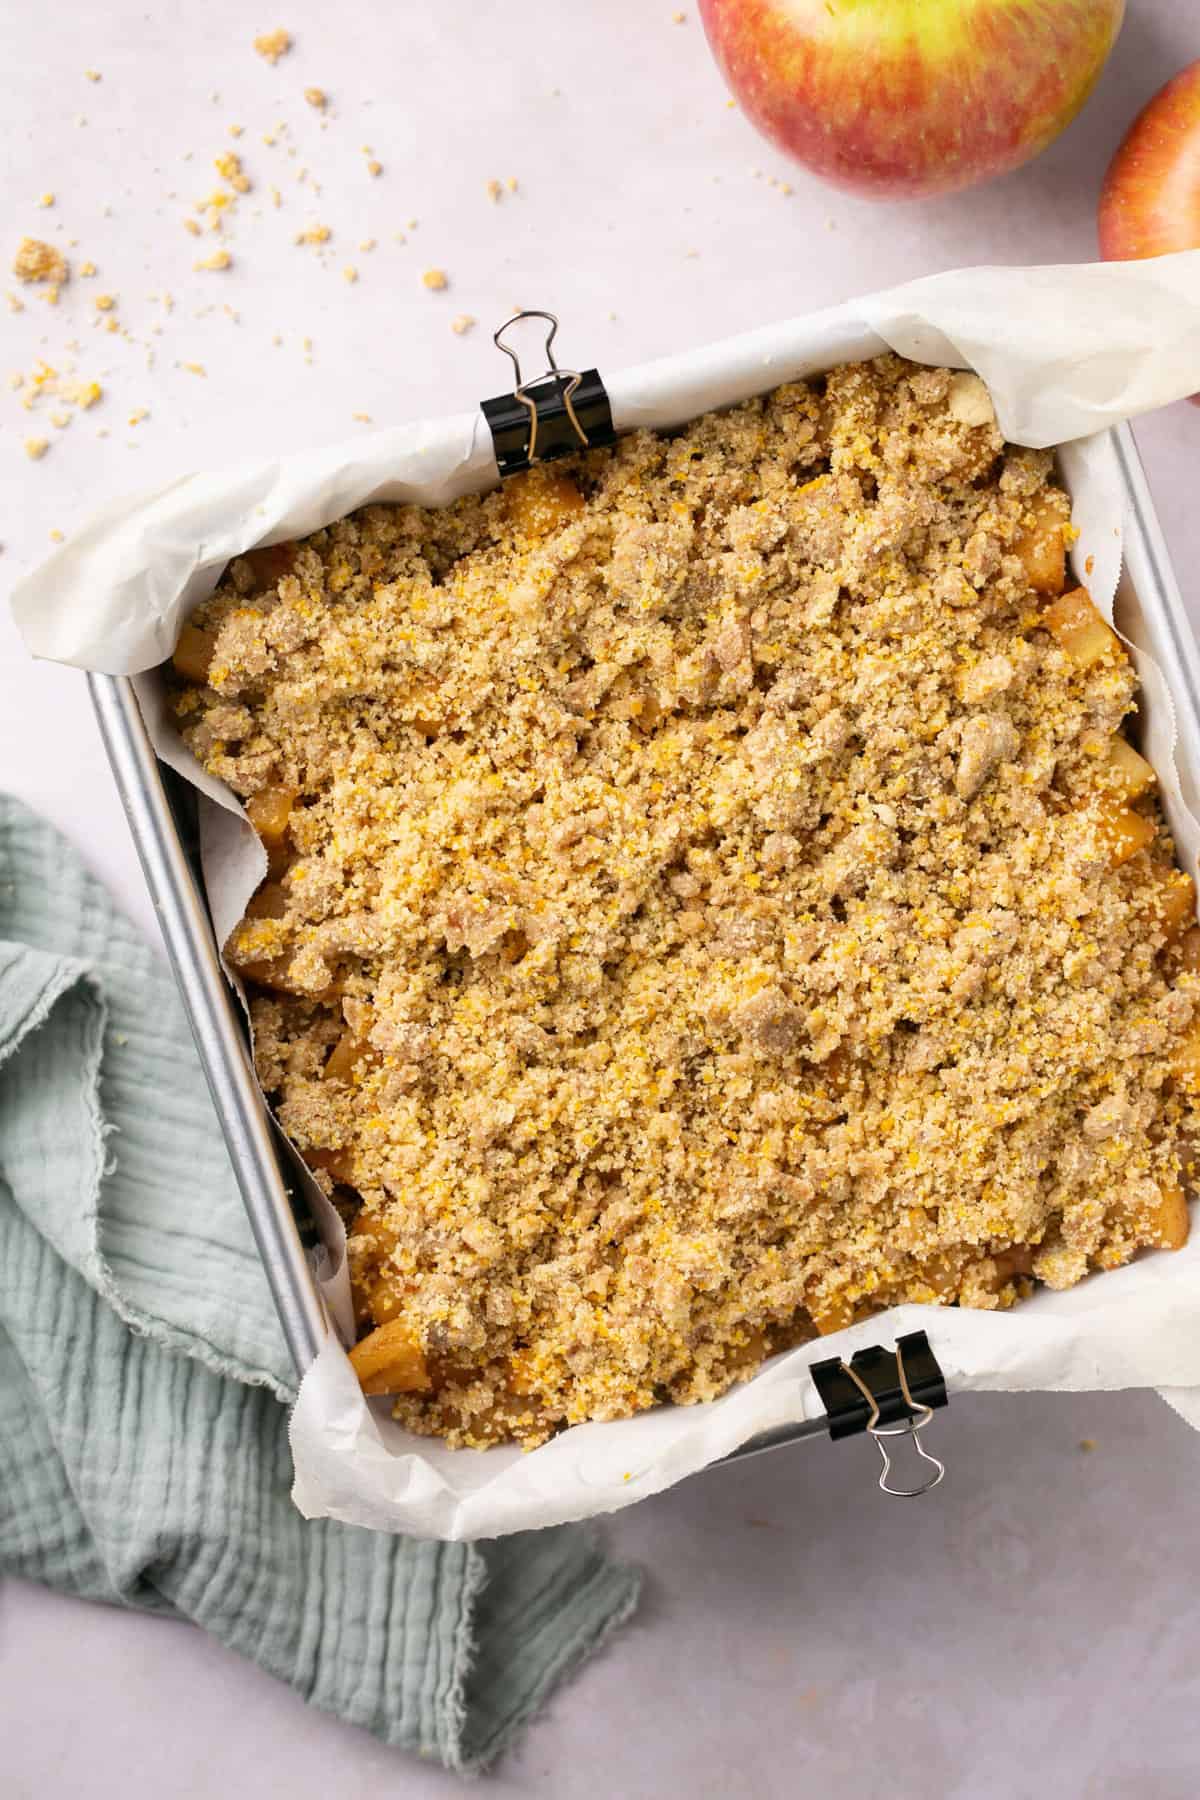 Unbaked apple crumble bars in a baking dish.